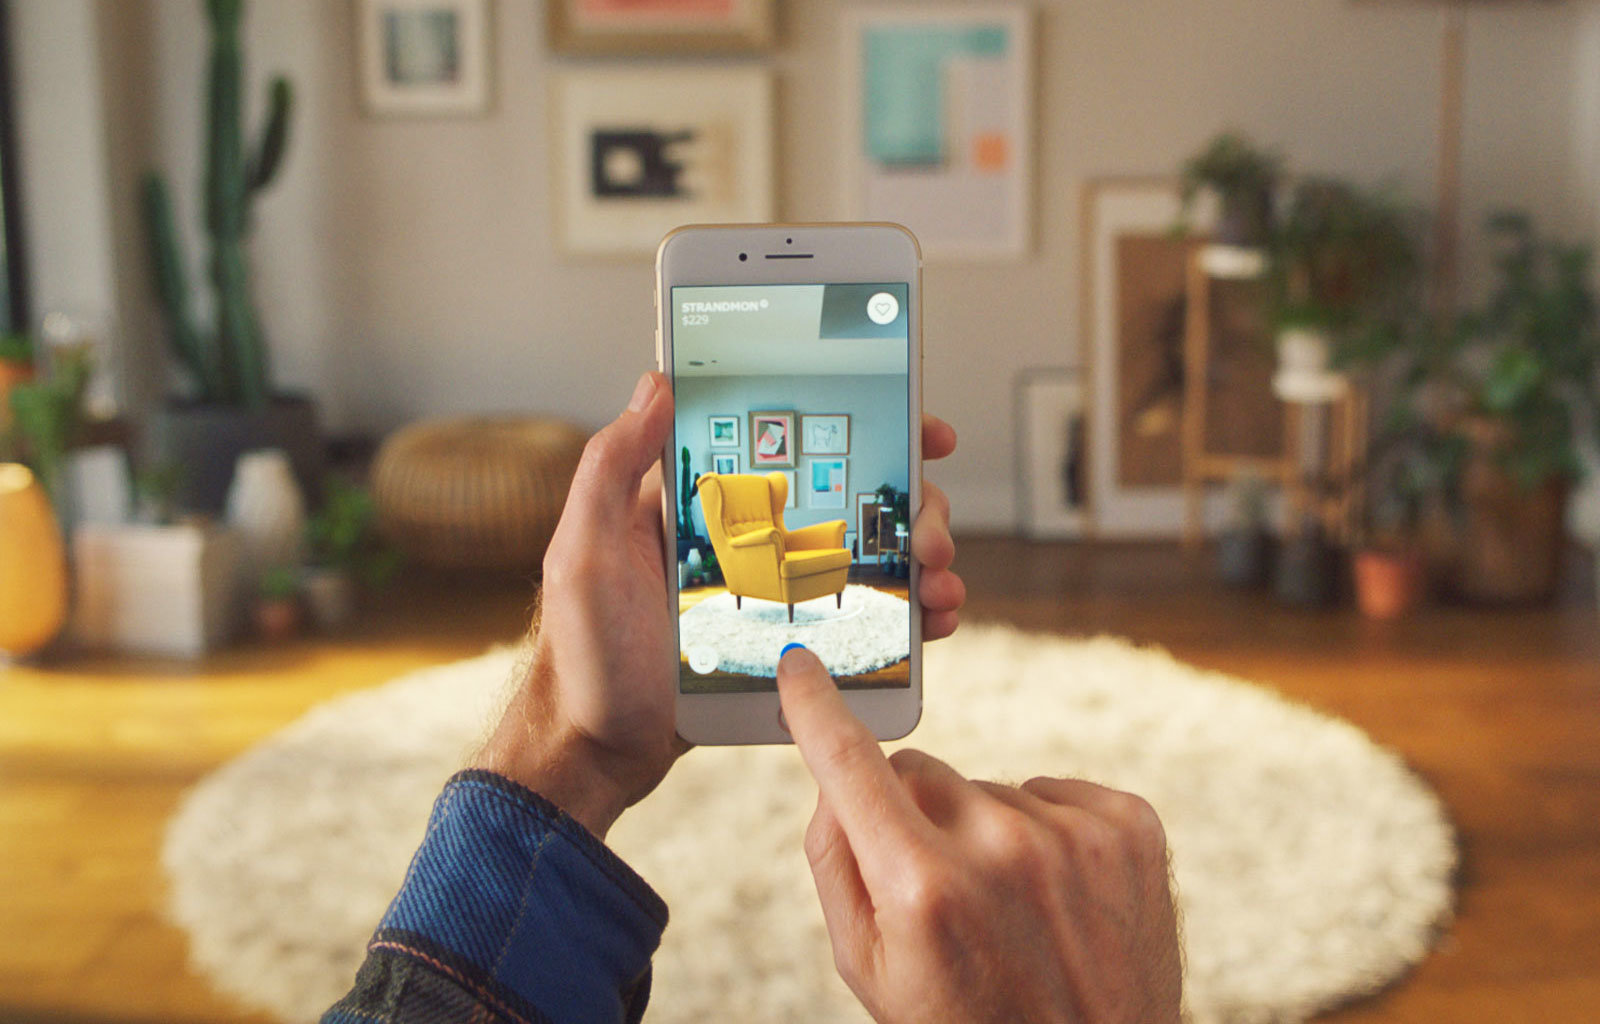 Augmented Reality Interior Design, armchair appearing on a phone screen over a living room environment